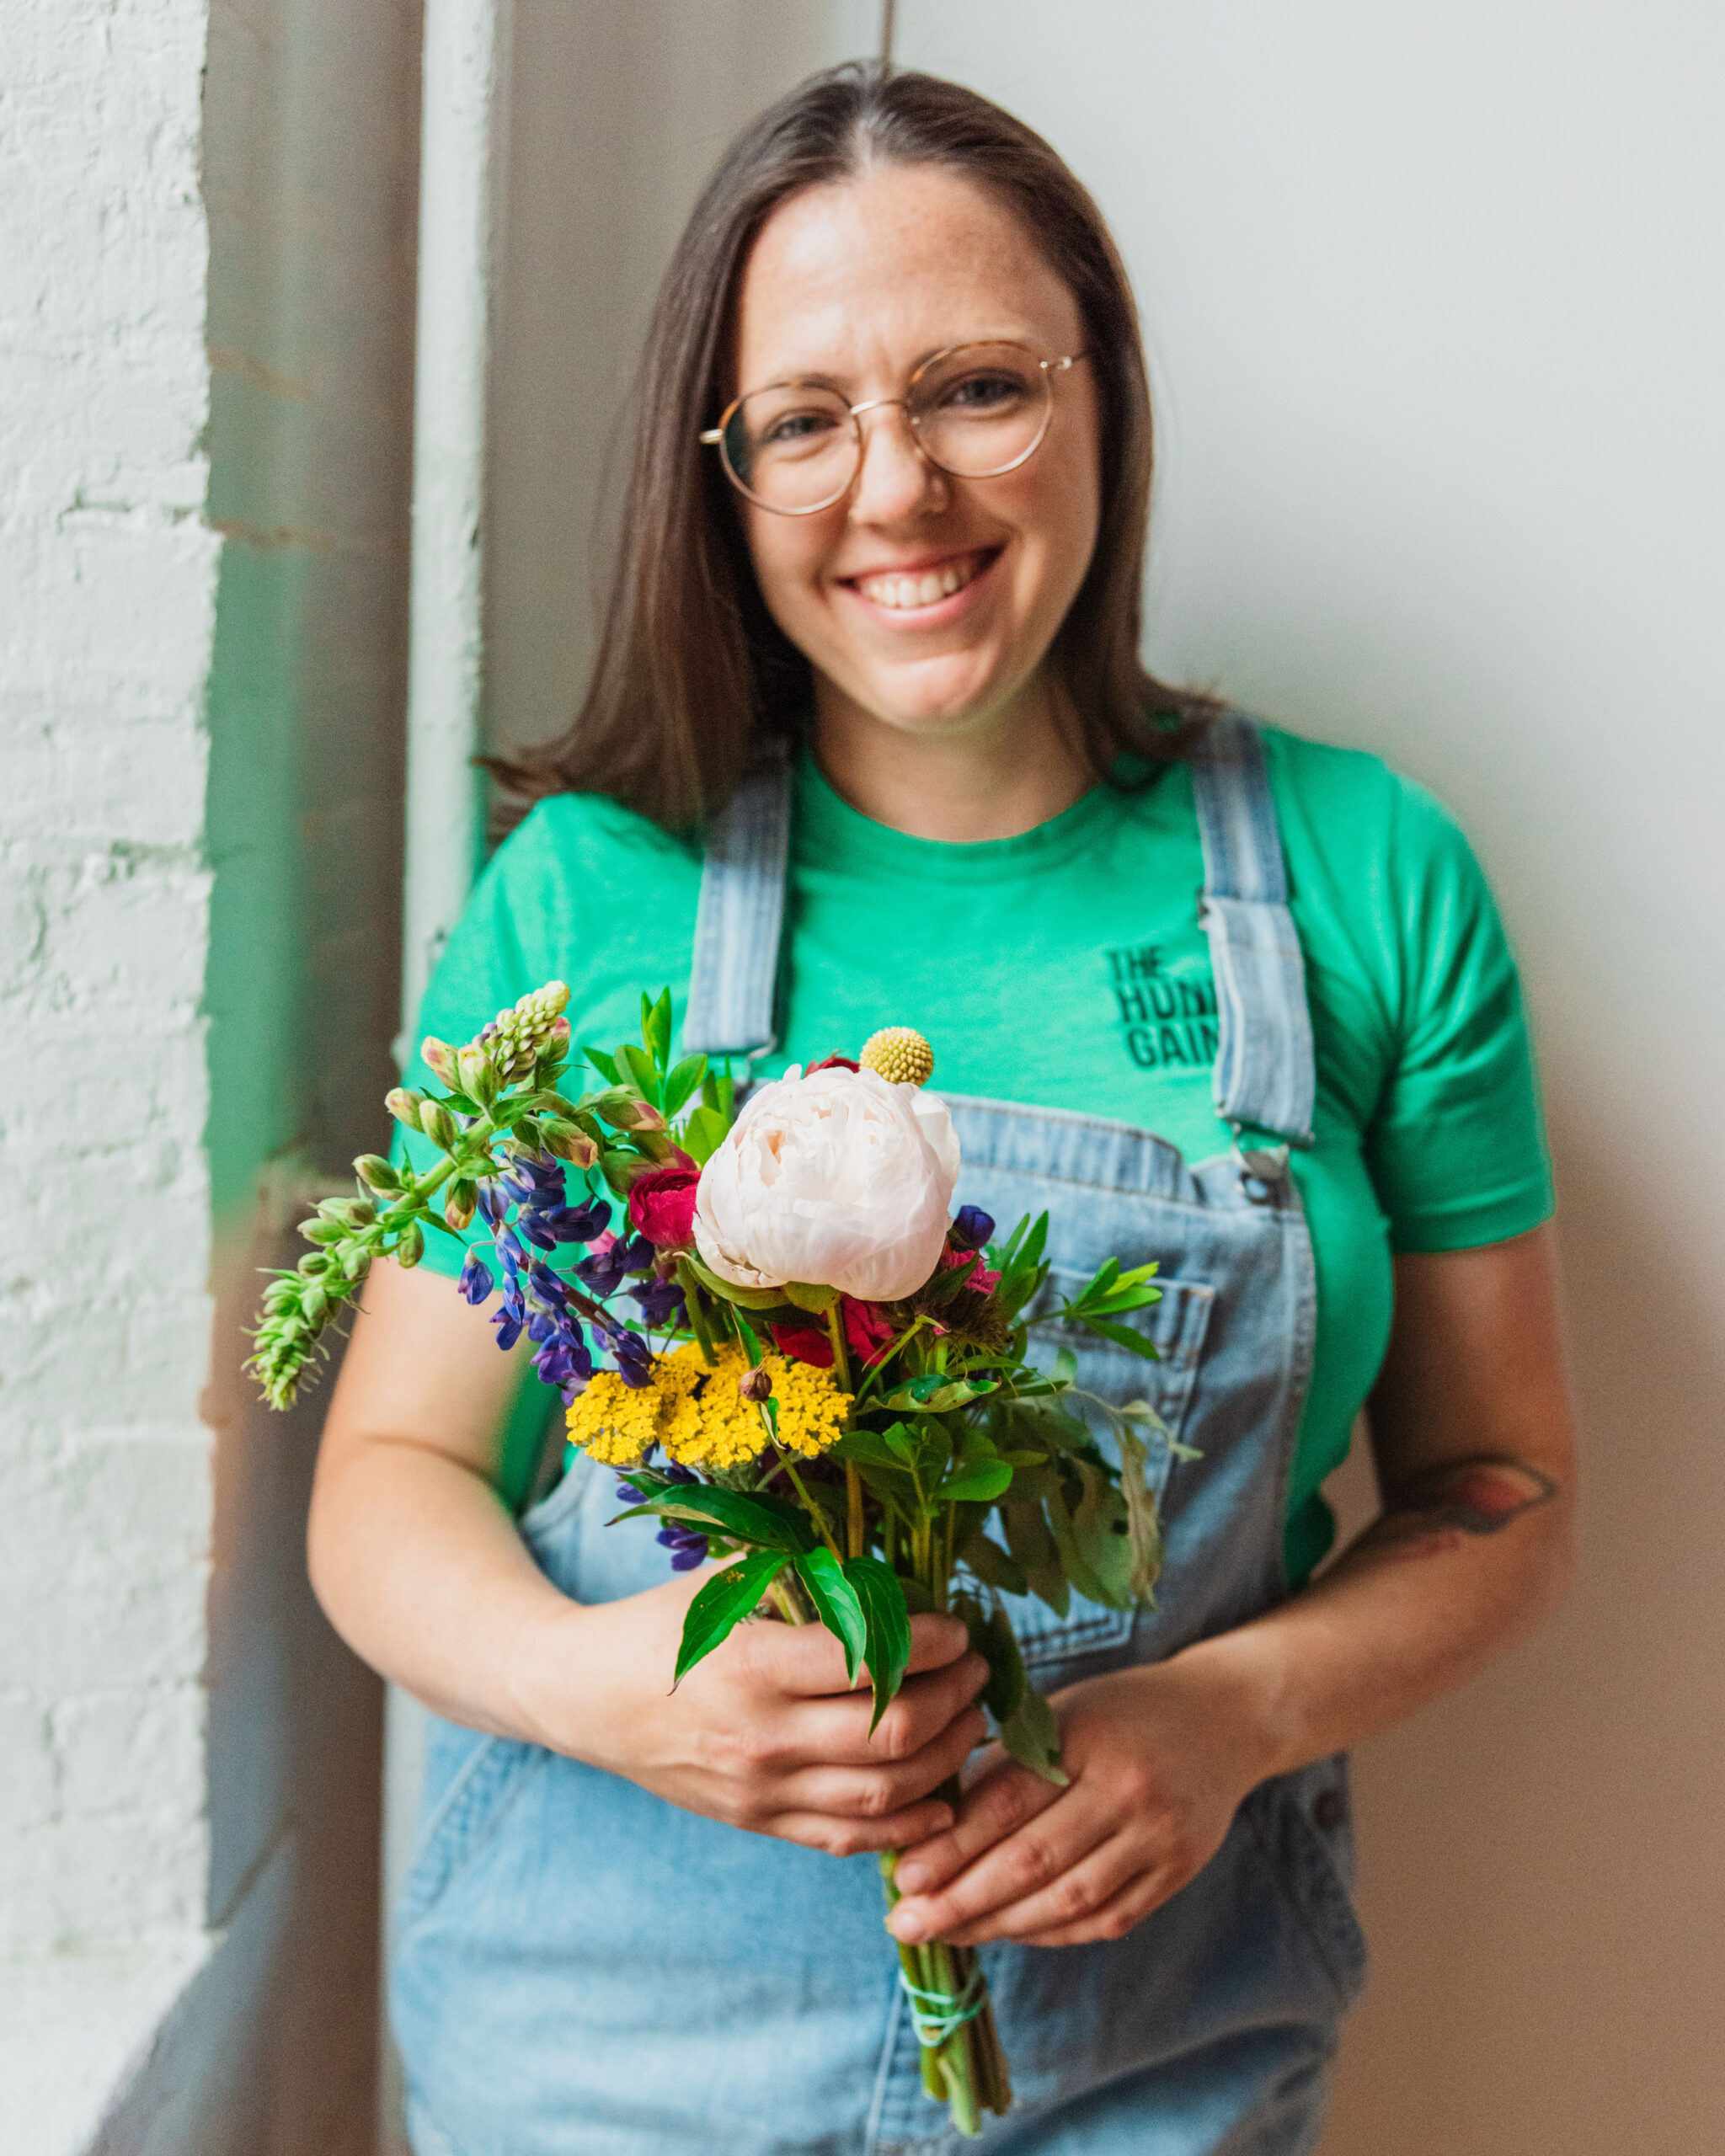 Alicia Valcaniant in overalls and green t-shirt holding a bouquet of flowers and smiling